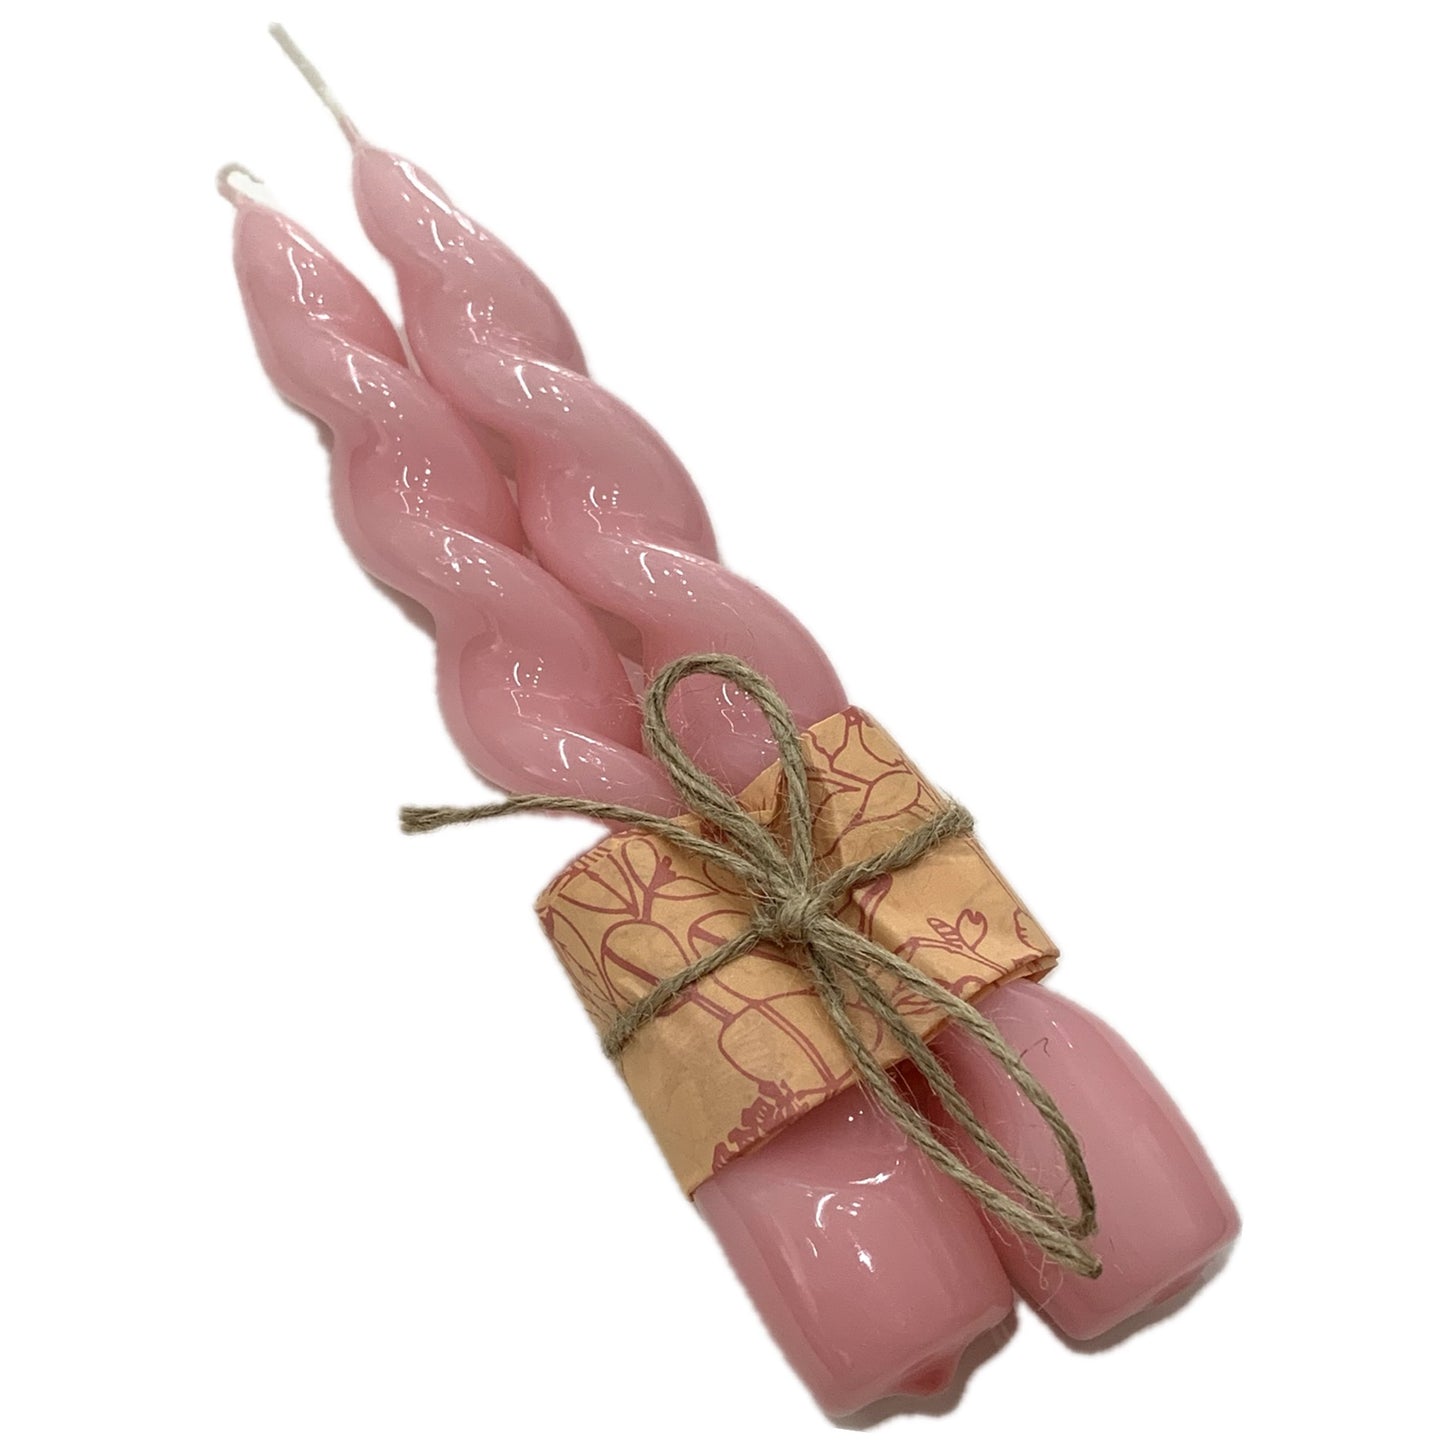 DANCING WITH JUNIPER- Italian Dreams Spiral Candle Set of 2- Pink